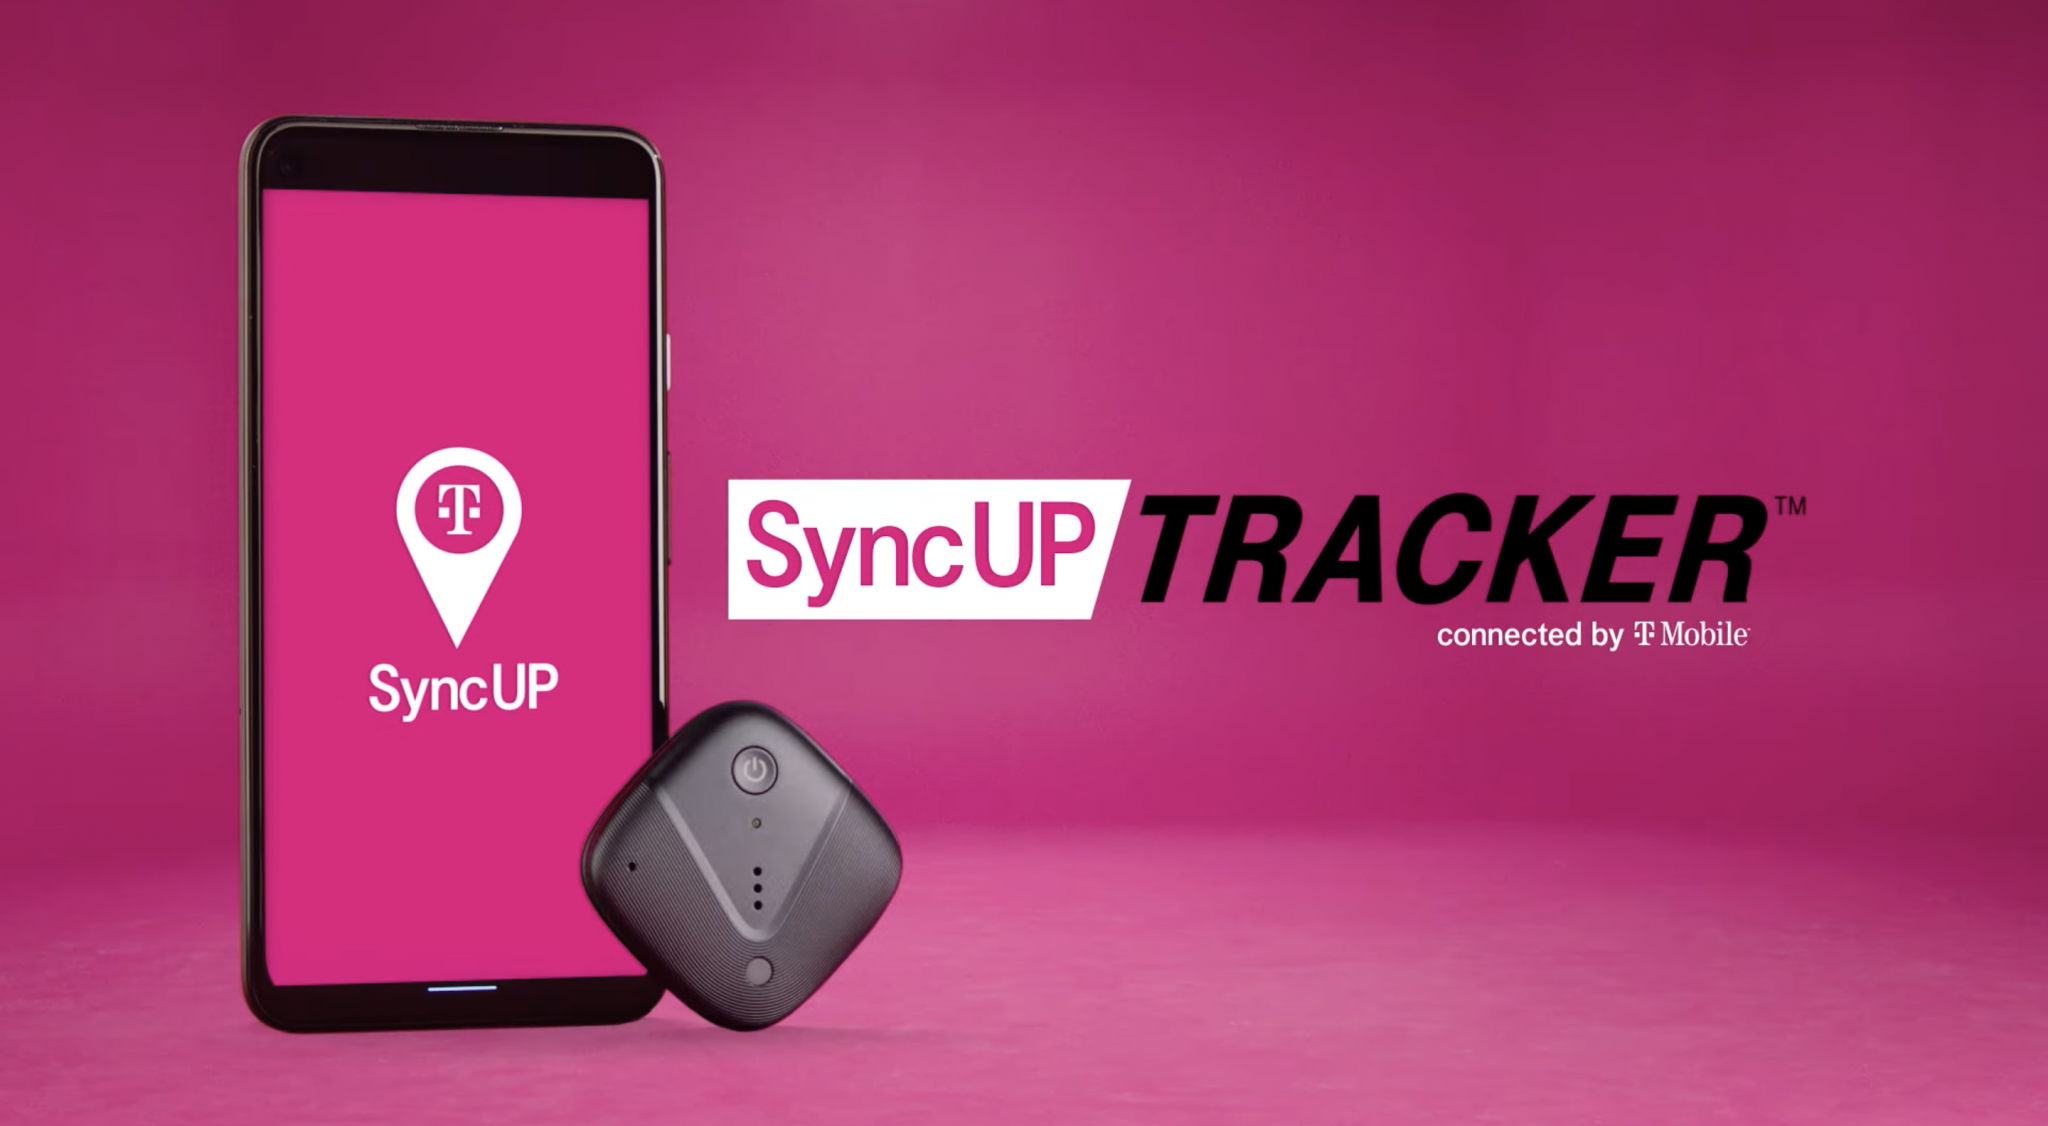 T Mobile SyncUp AirTag Like Tracker